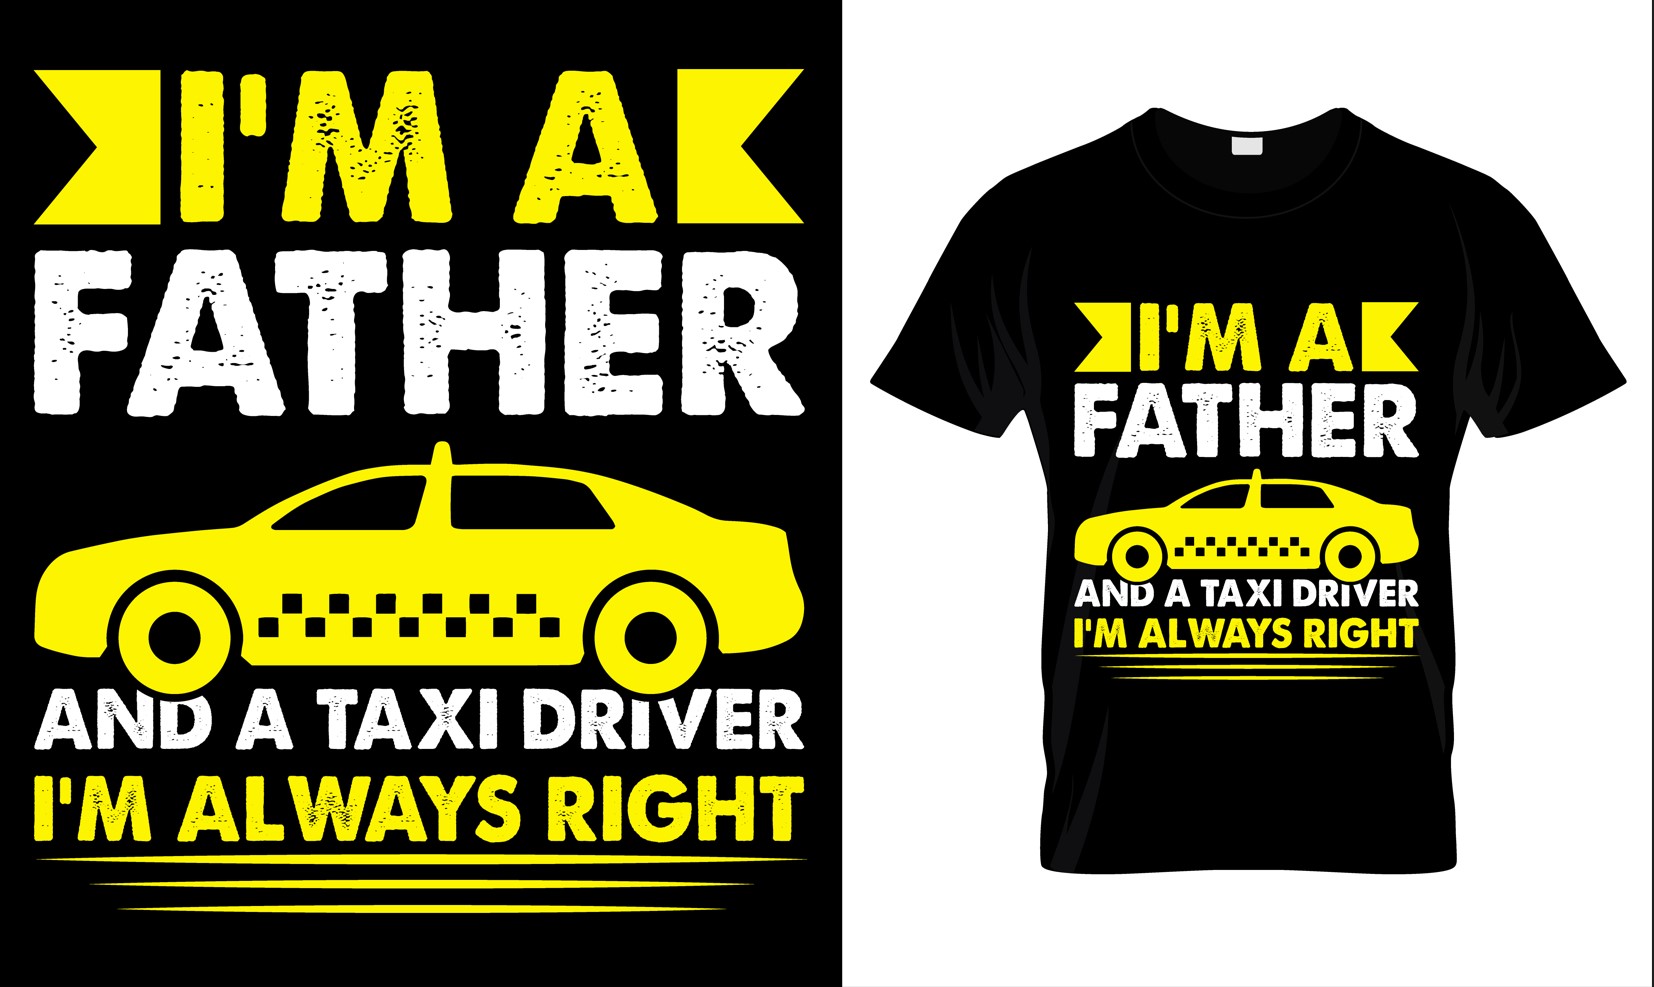 Image of a T-shirt with a wonderful print of taxi and lettering